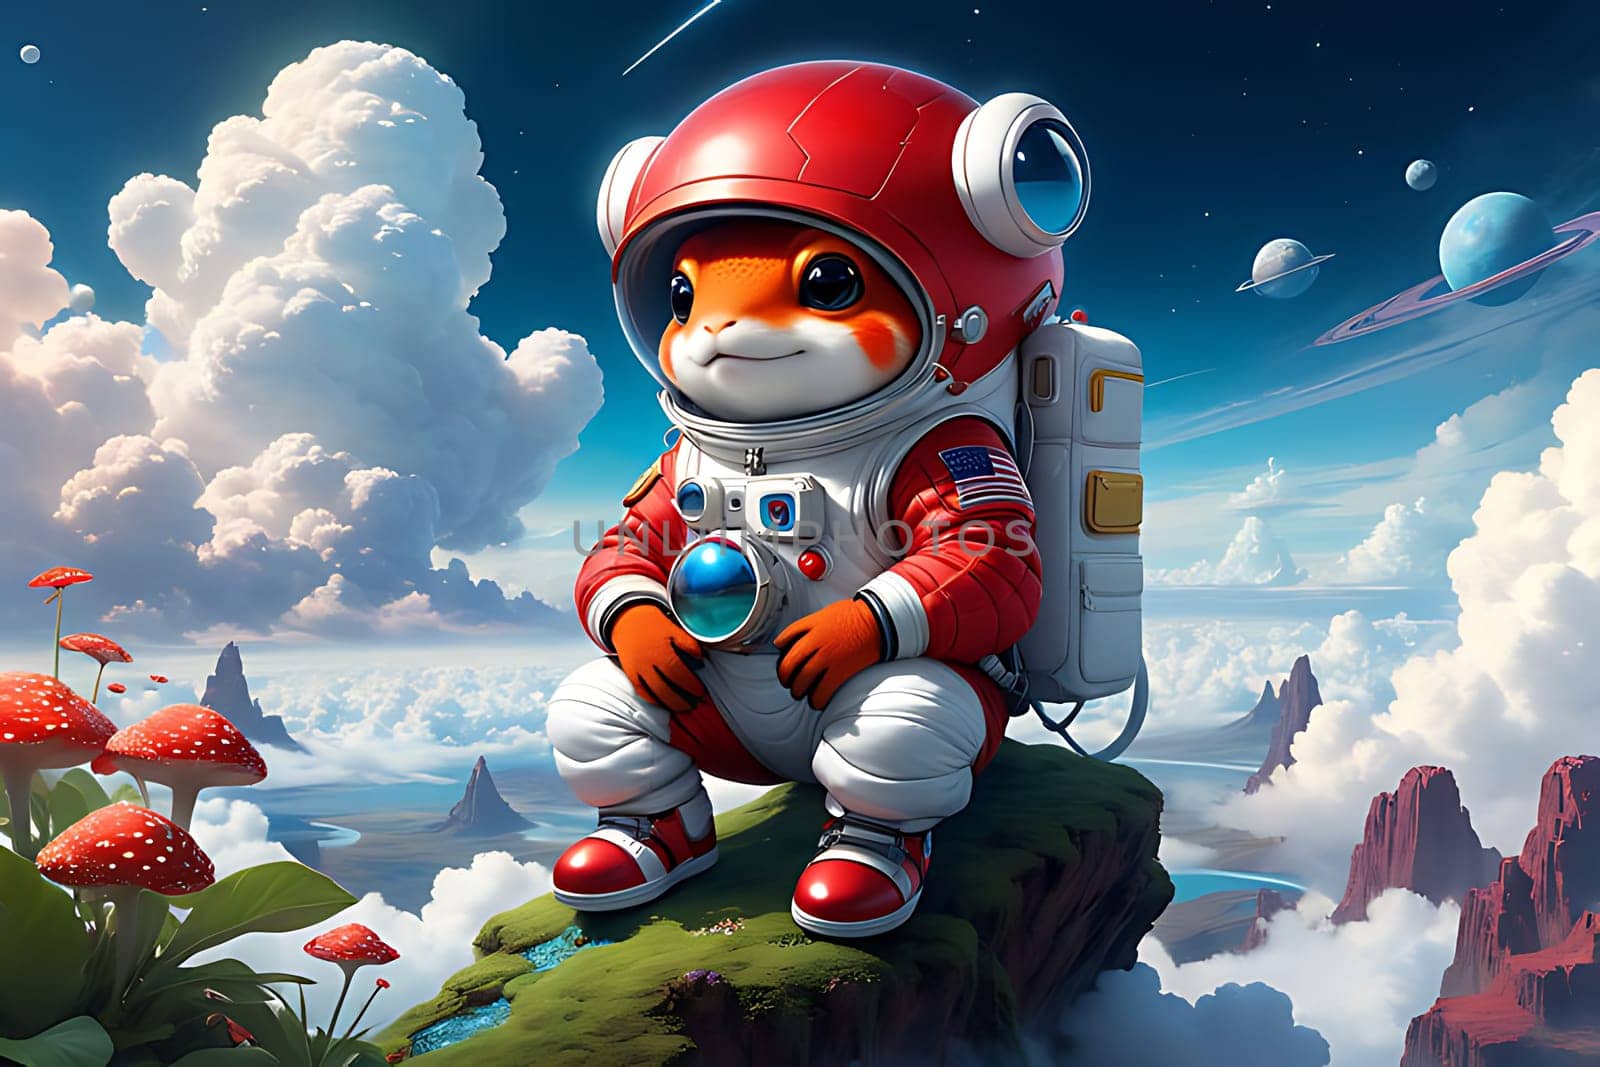 A red and white cat, dressed in a futuristic space suit, calmly sits on a rock in an out-of-this-world environment.